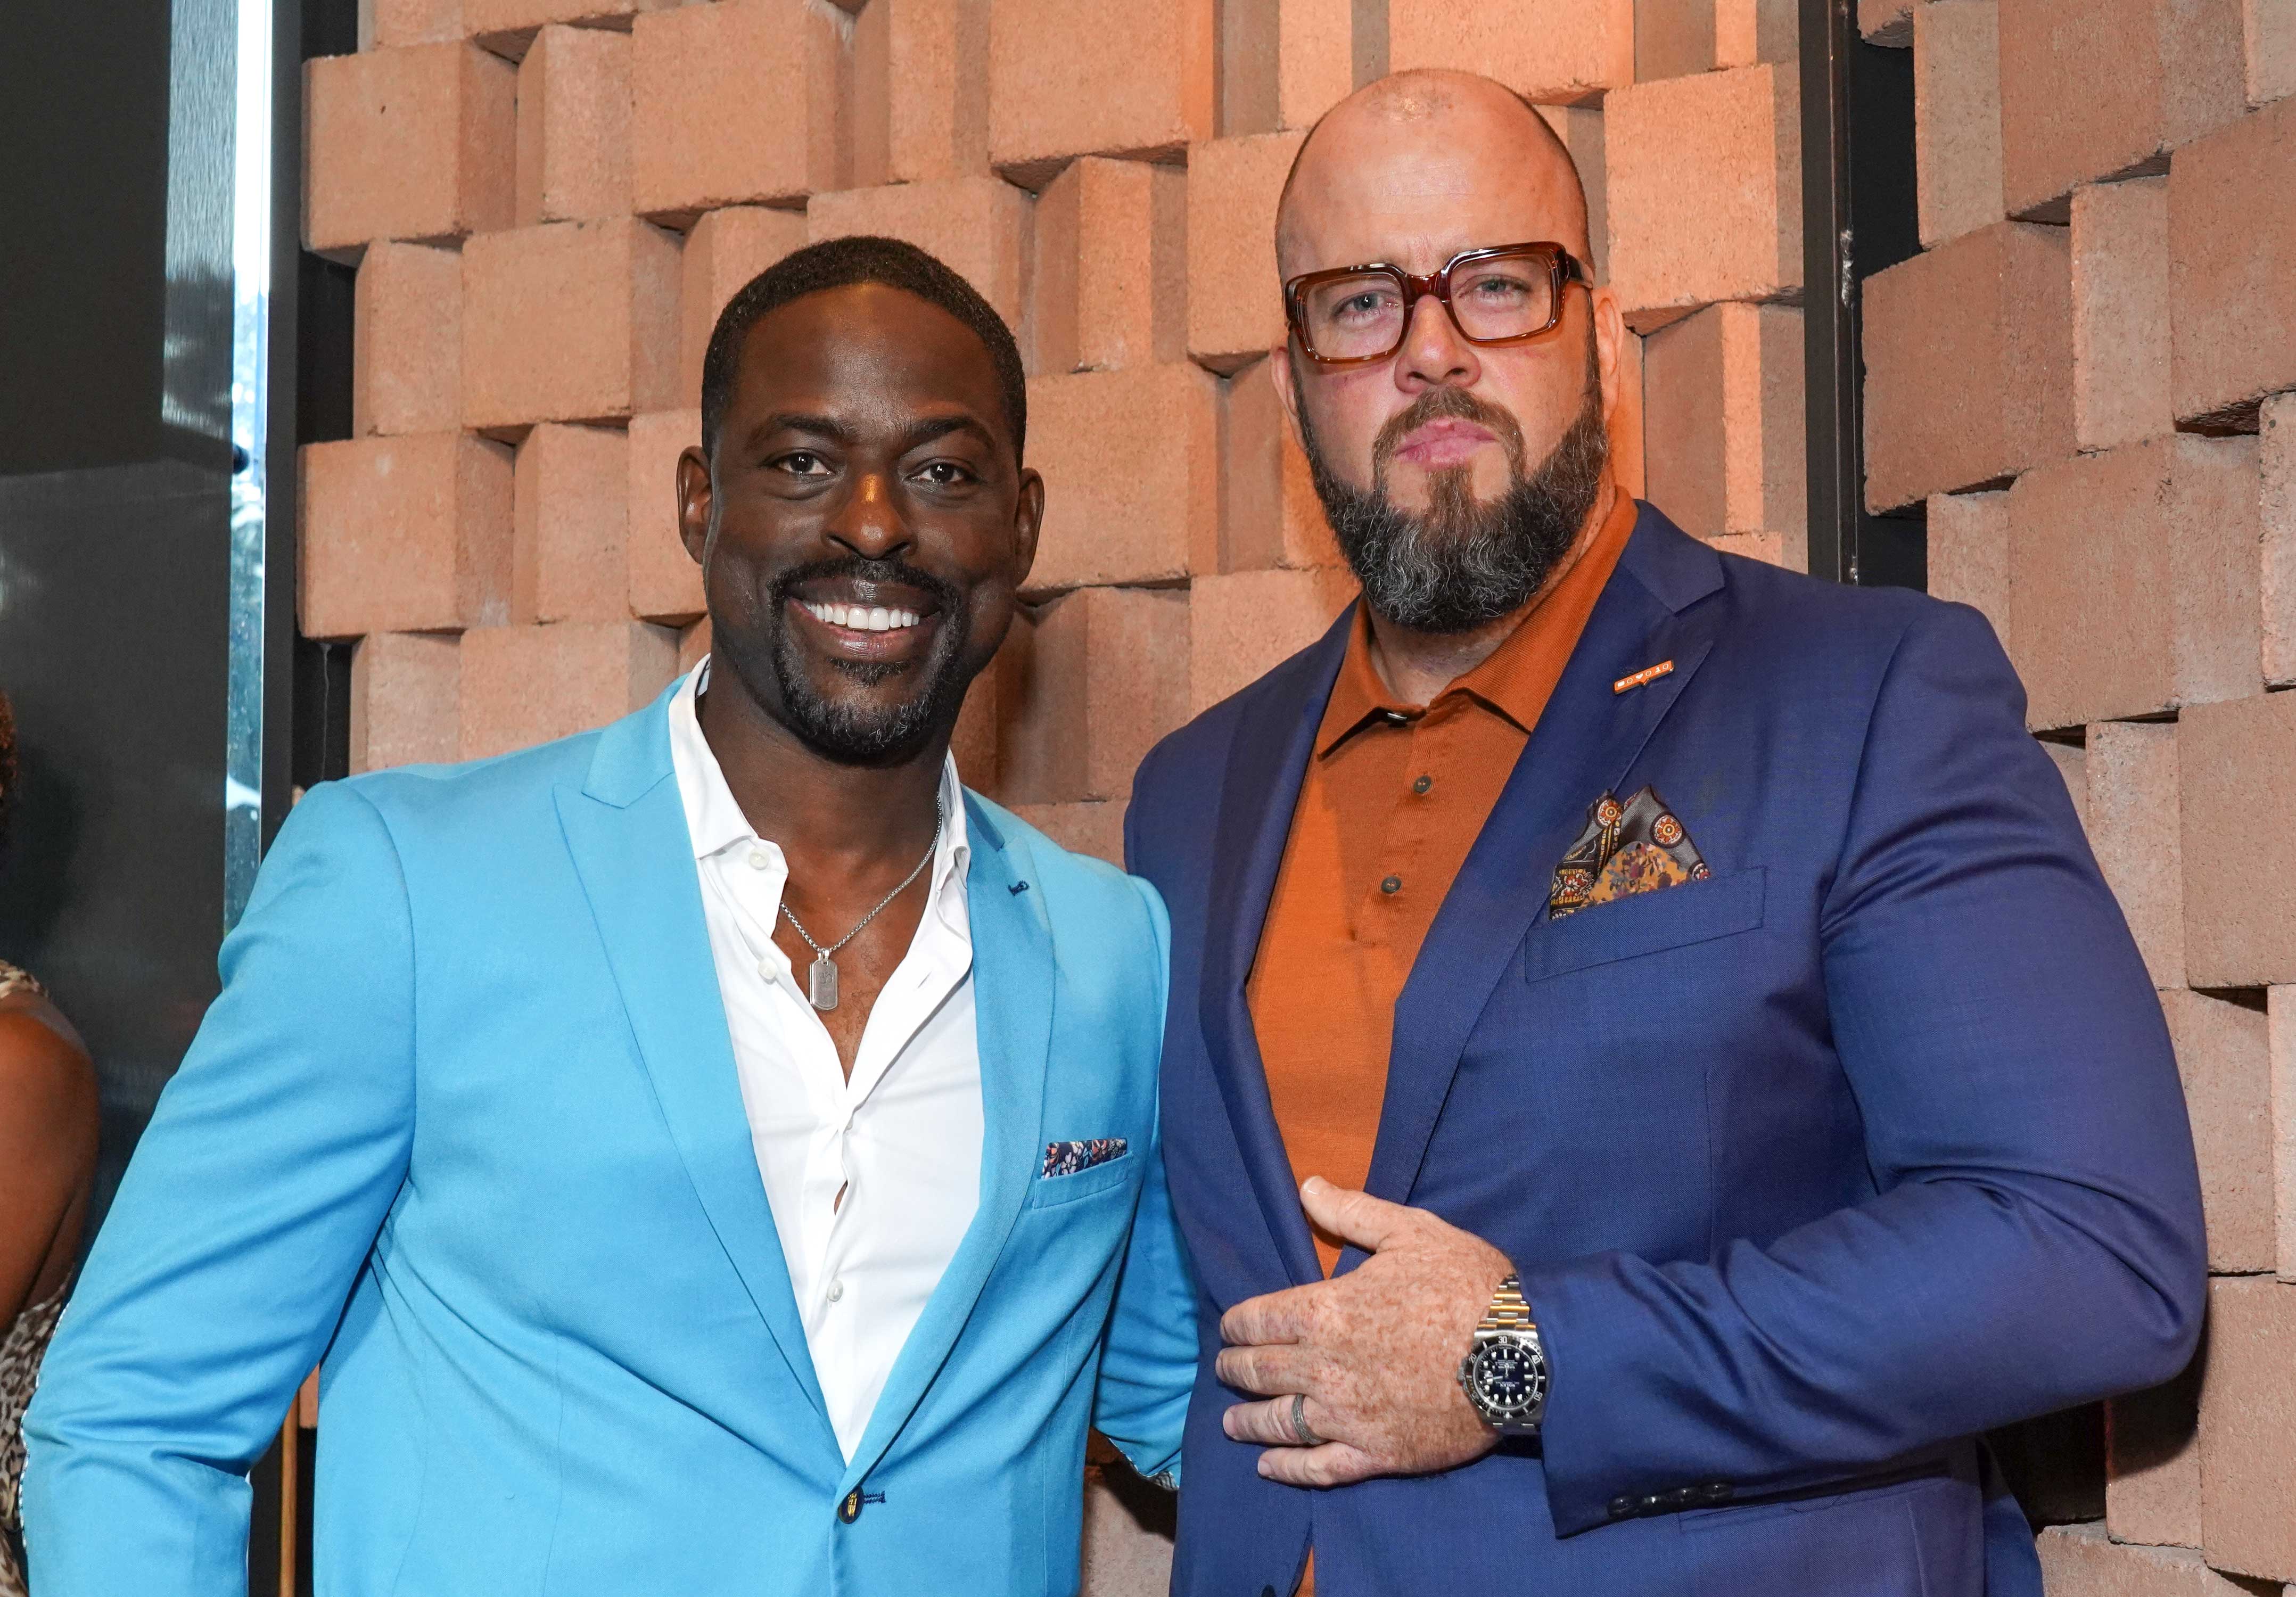 Chris Sullivan and Sterling K. Brown wearing blue suits at an event.